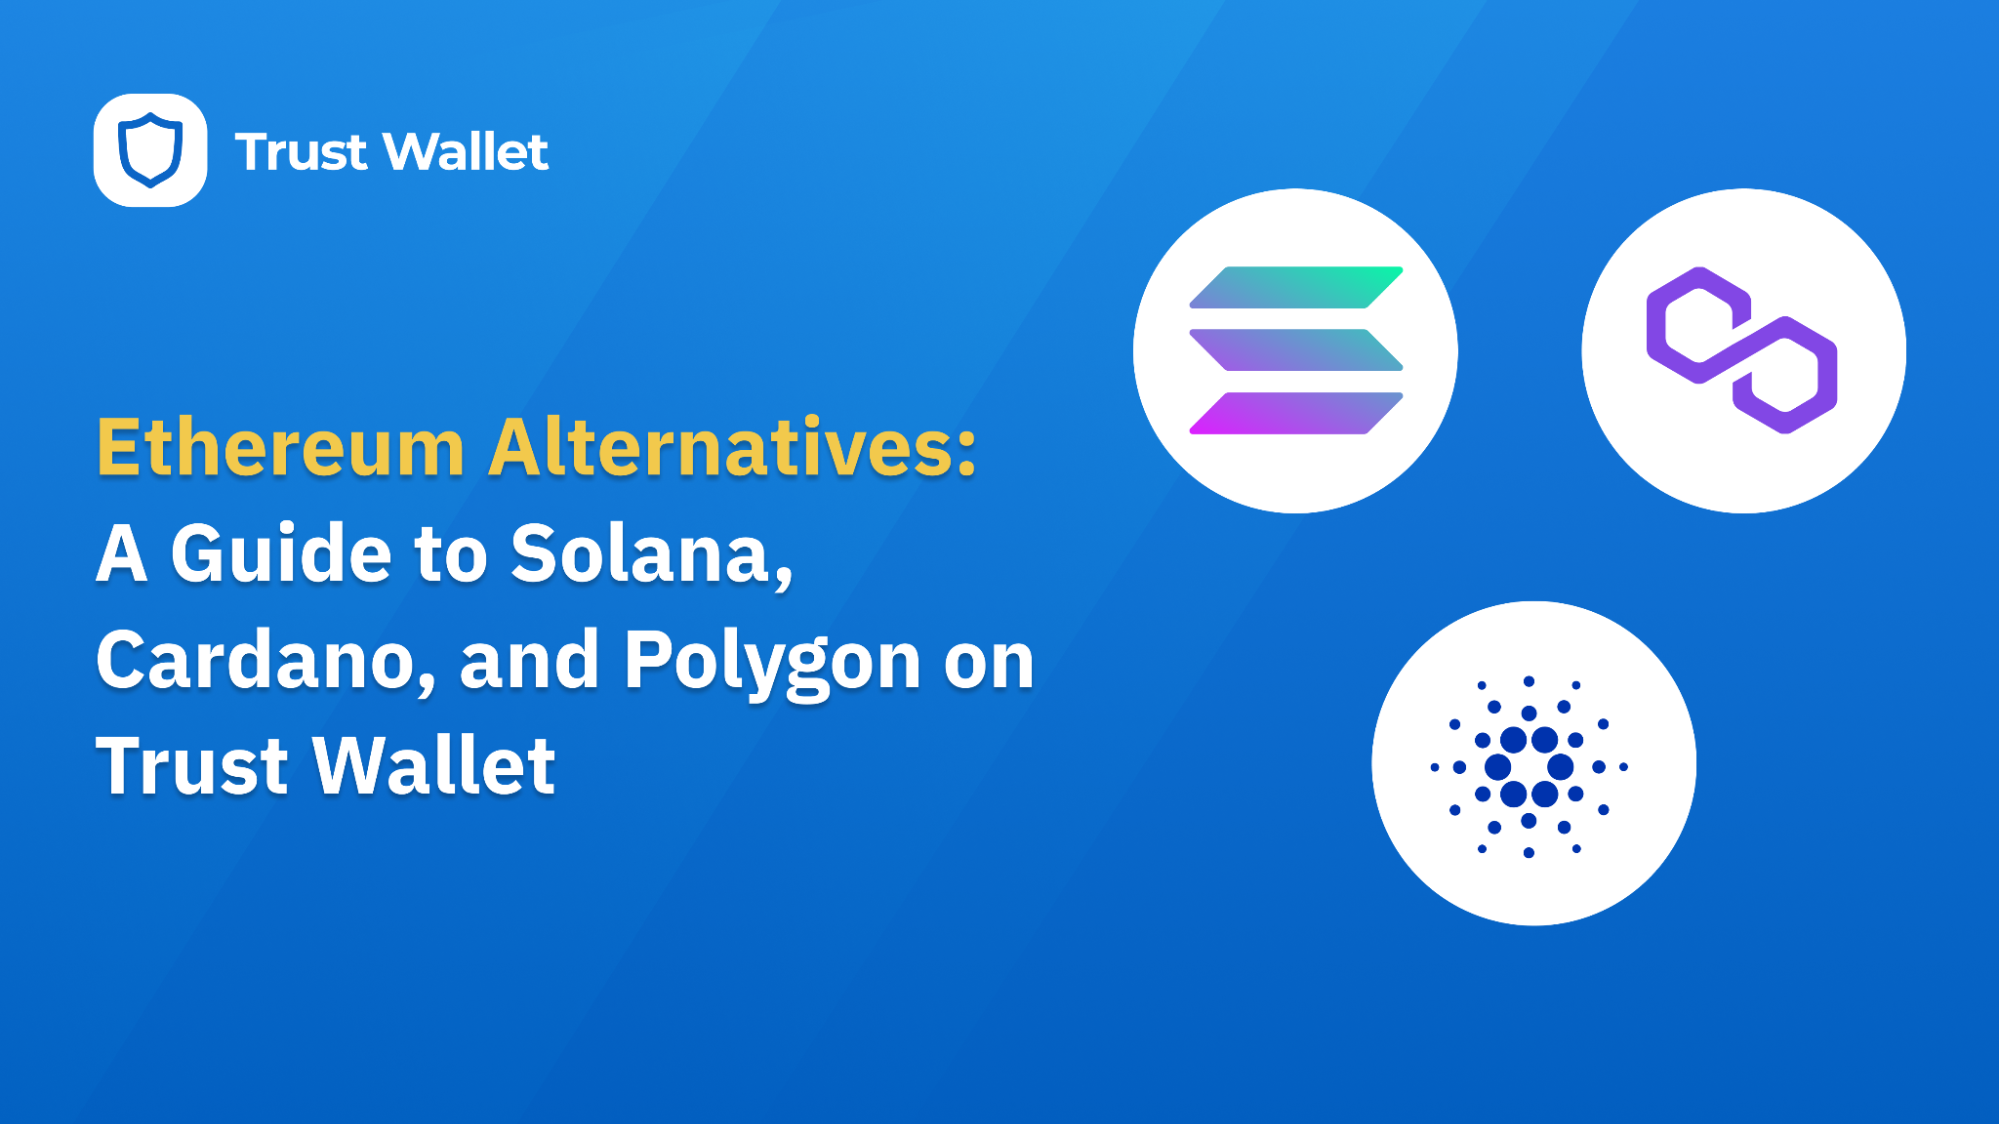 Ethereum Alternatives: A Guide to Solana, Cardano, and Polygon on Trust Wallet